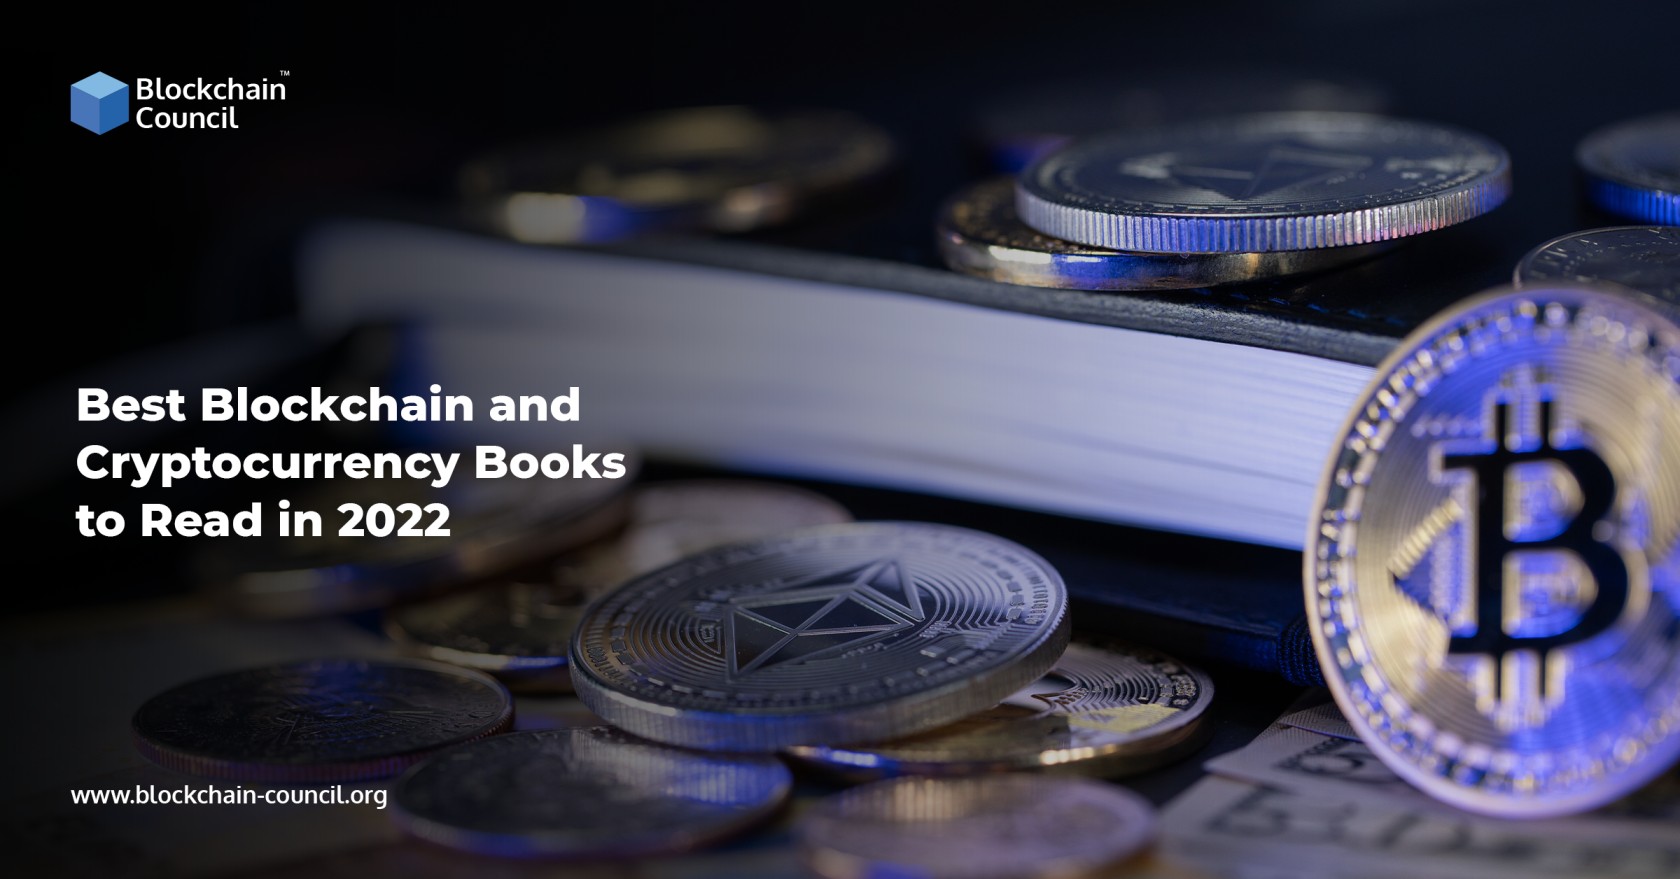 Best Blockchain and cryptocurrency books to read in 2022